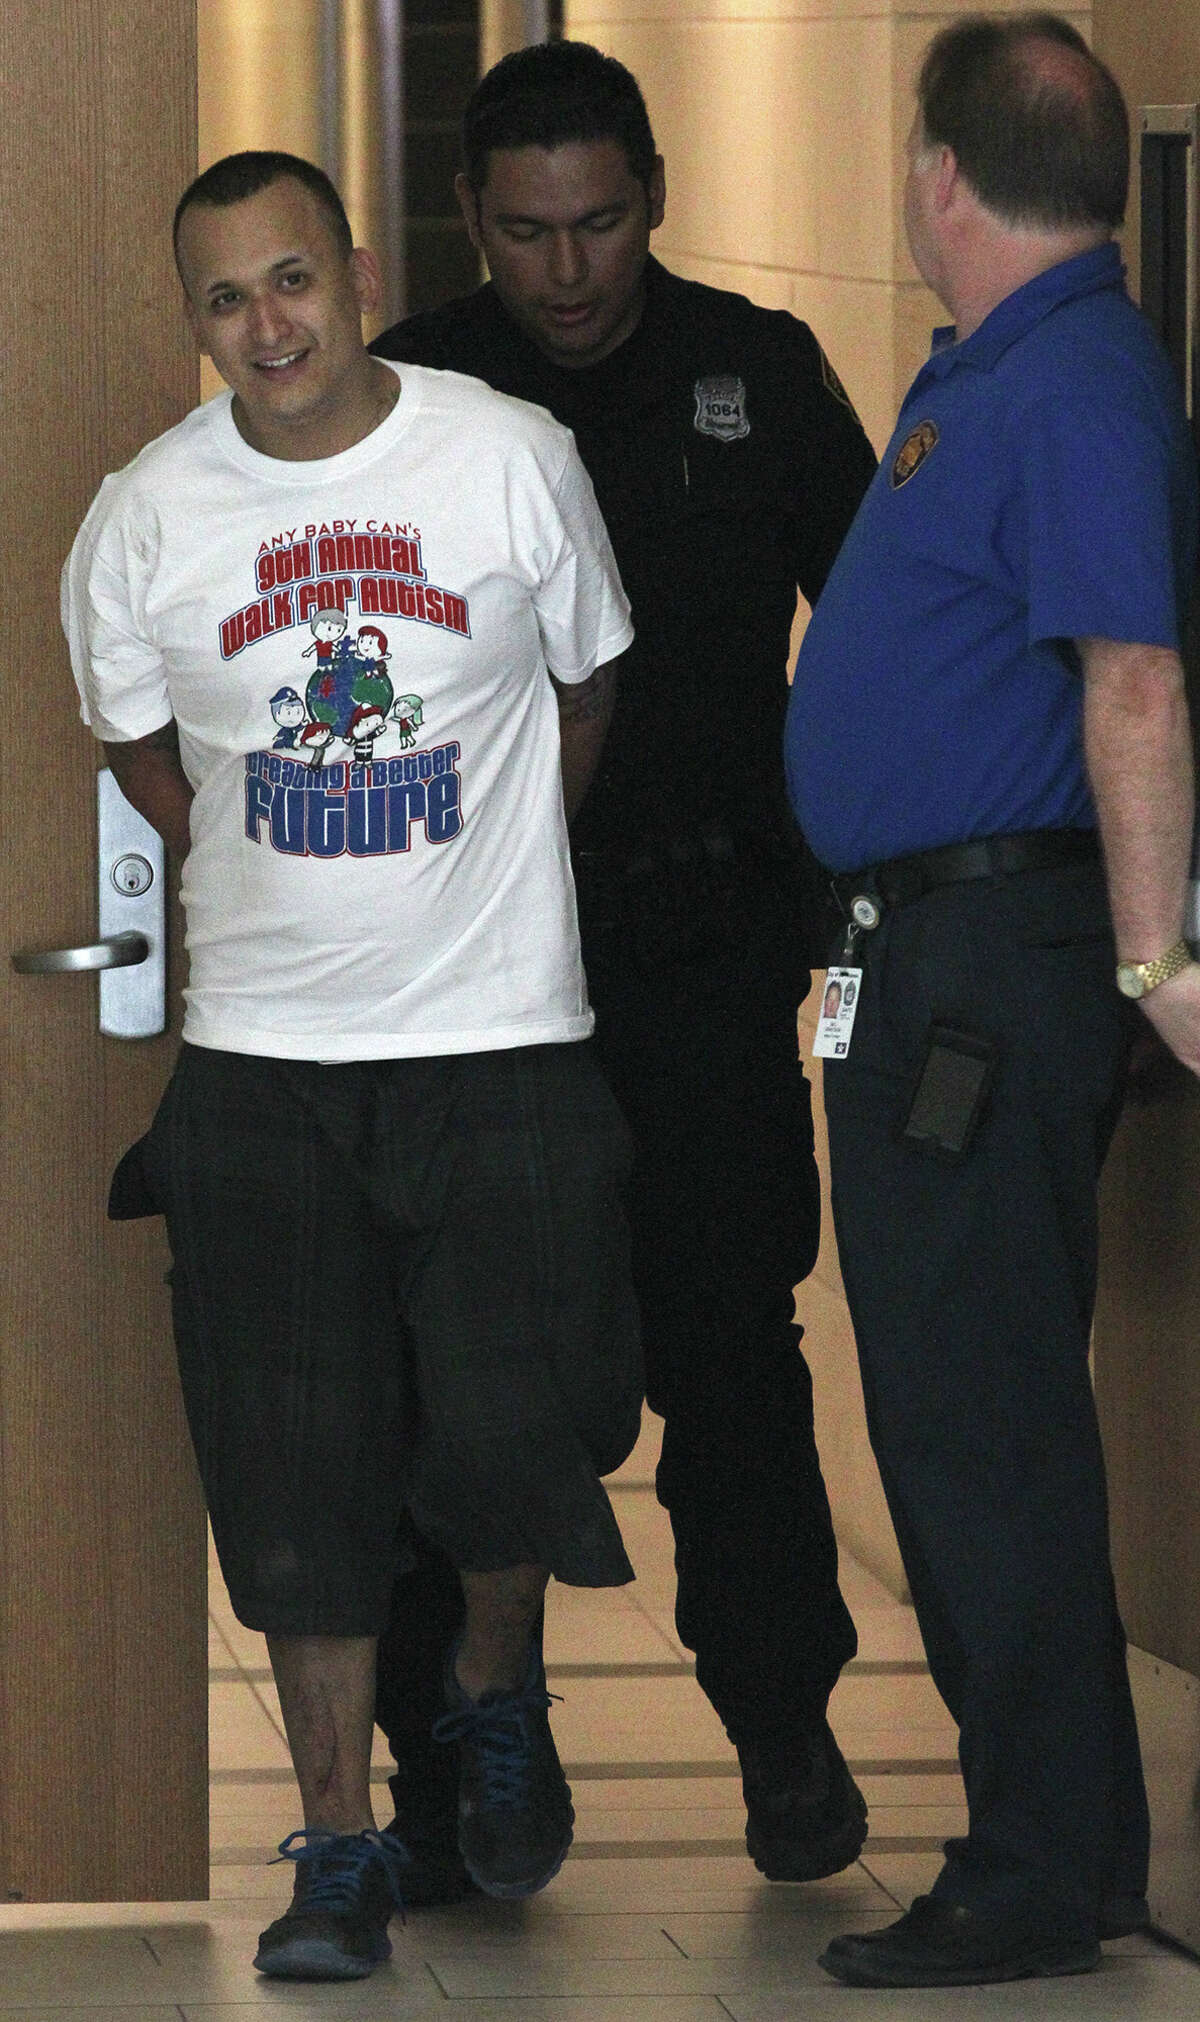 Suspect Nicolas Gutierrez (left) is escorted Monday February 17, 2014 to a police car after being charged with sexual assault of a child, unlawful restraint and kidnapping. Gutierrez and another suspect, Johnny Garcia, allegedly held a 15-year-old girl at a local hotel against her will. Garcia is already in jail.